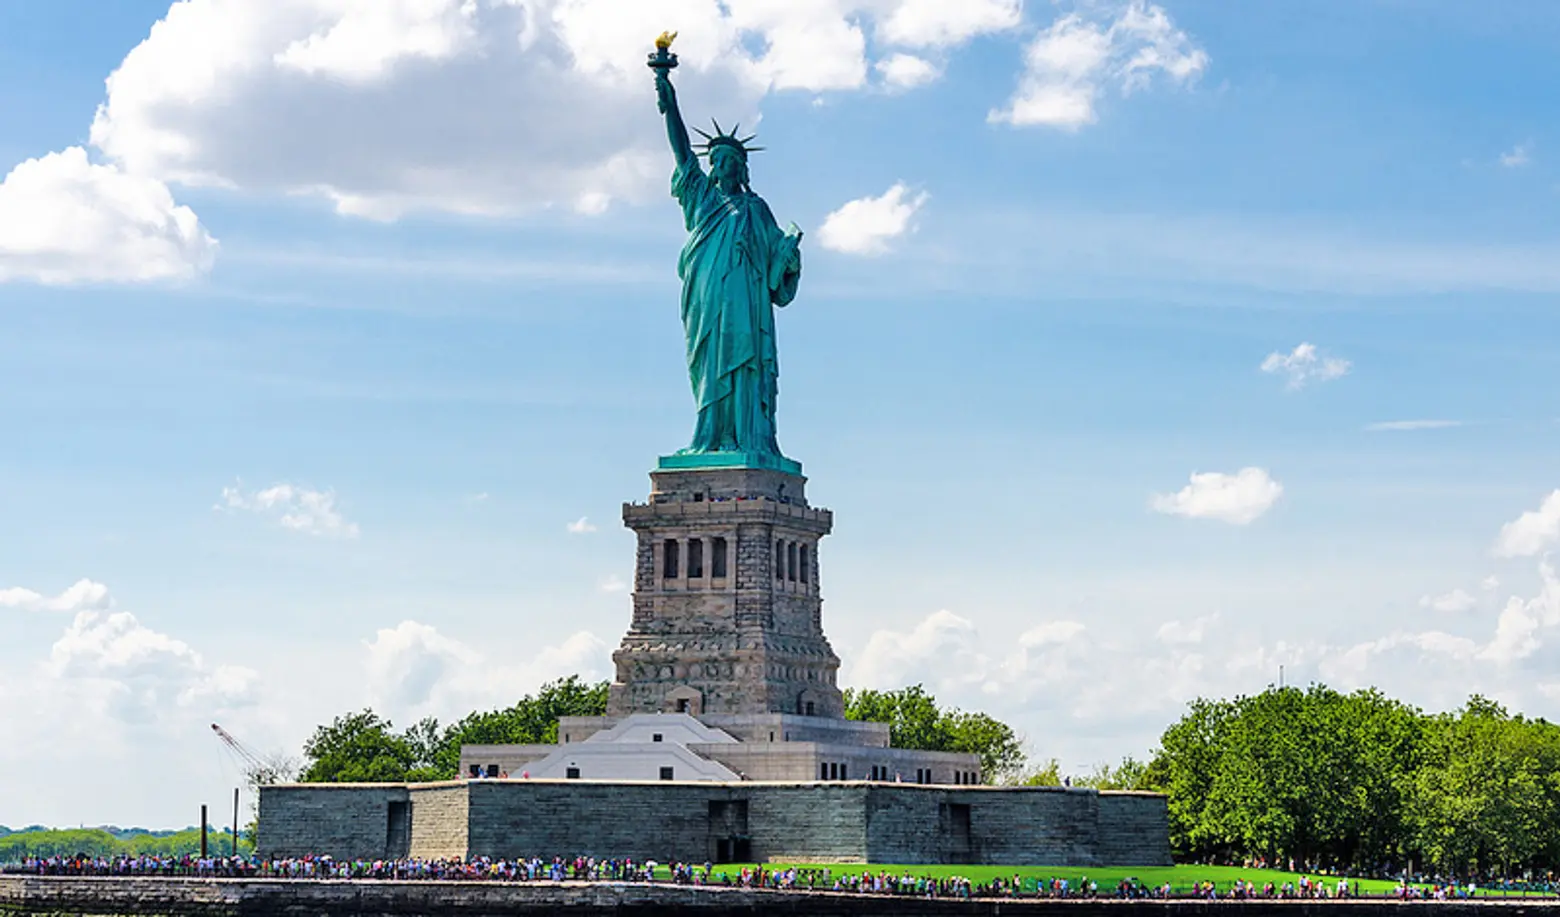 The Statue of Liberty will receive a $4.58 million makeover